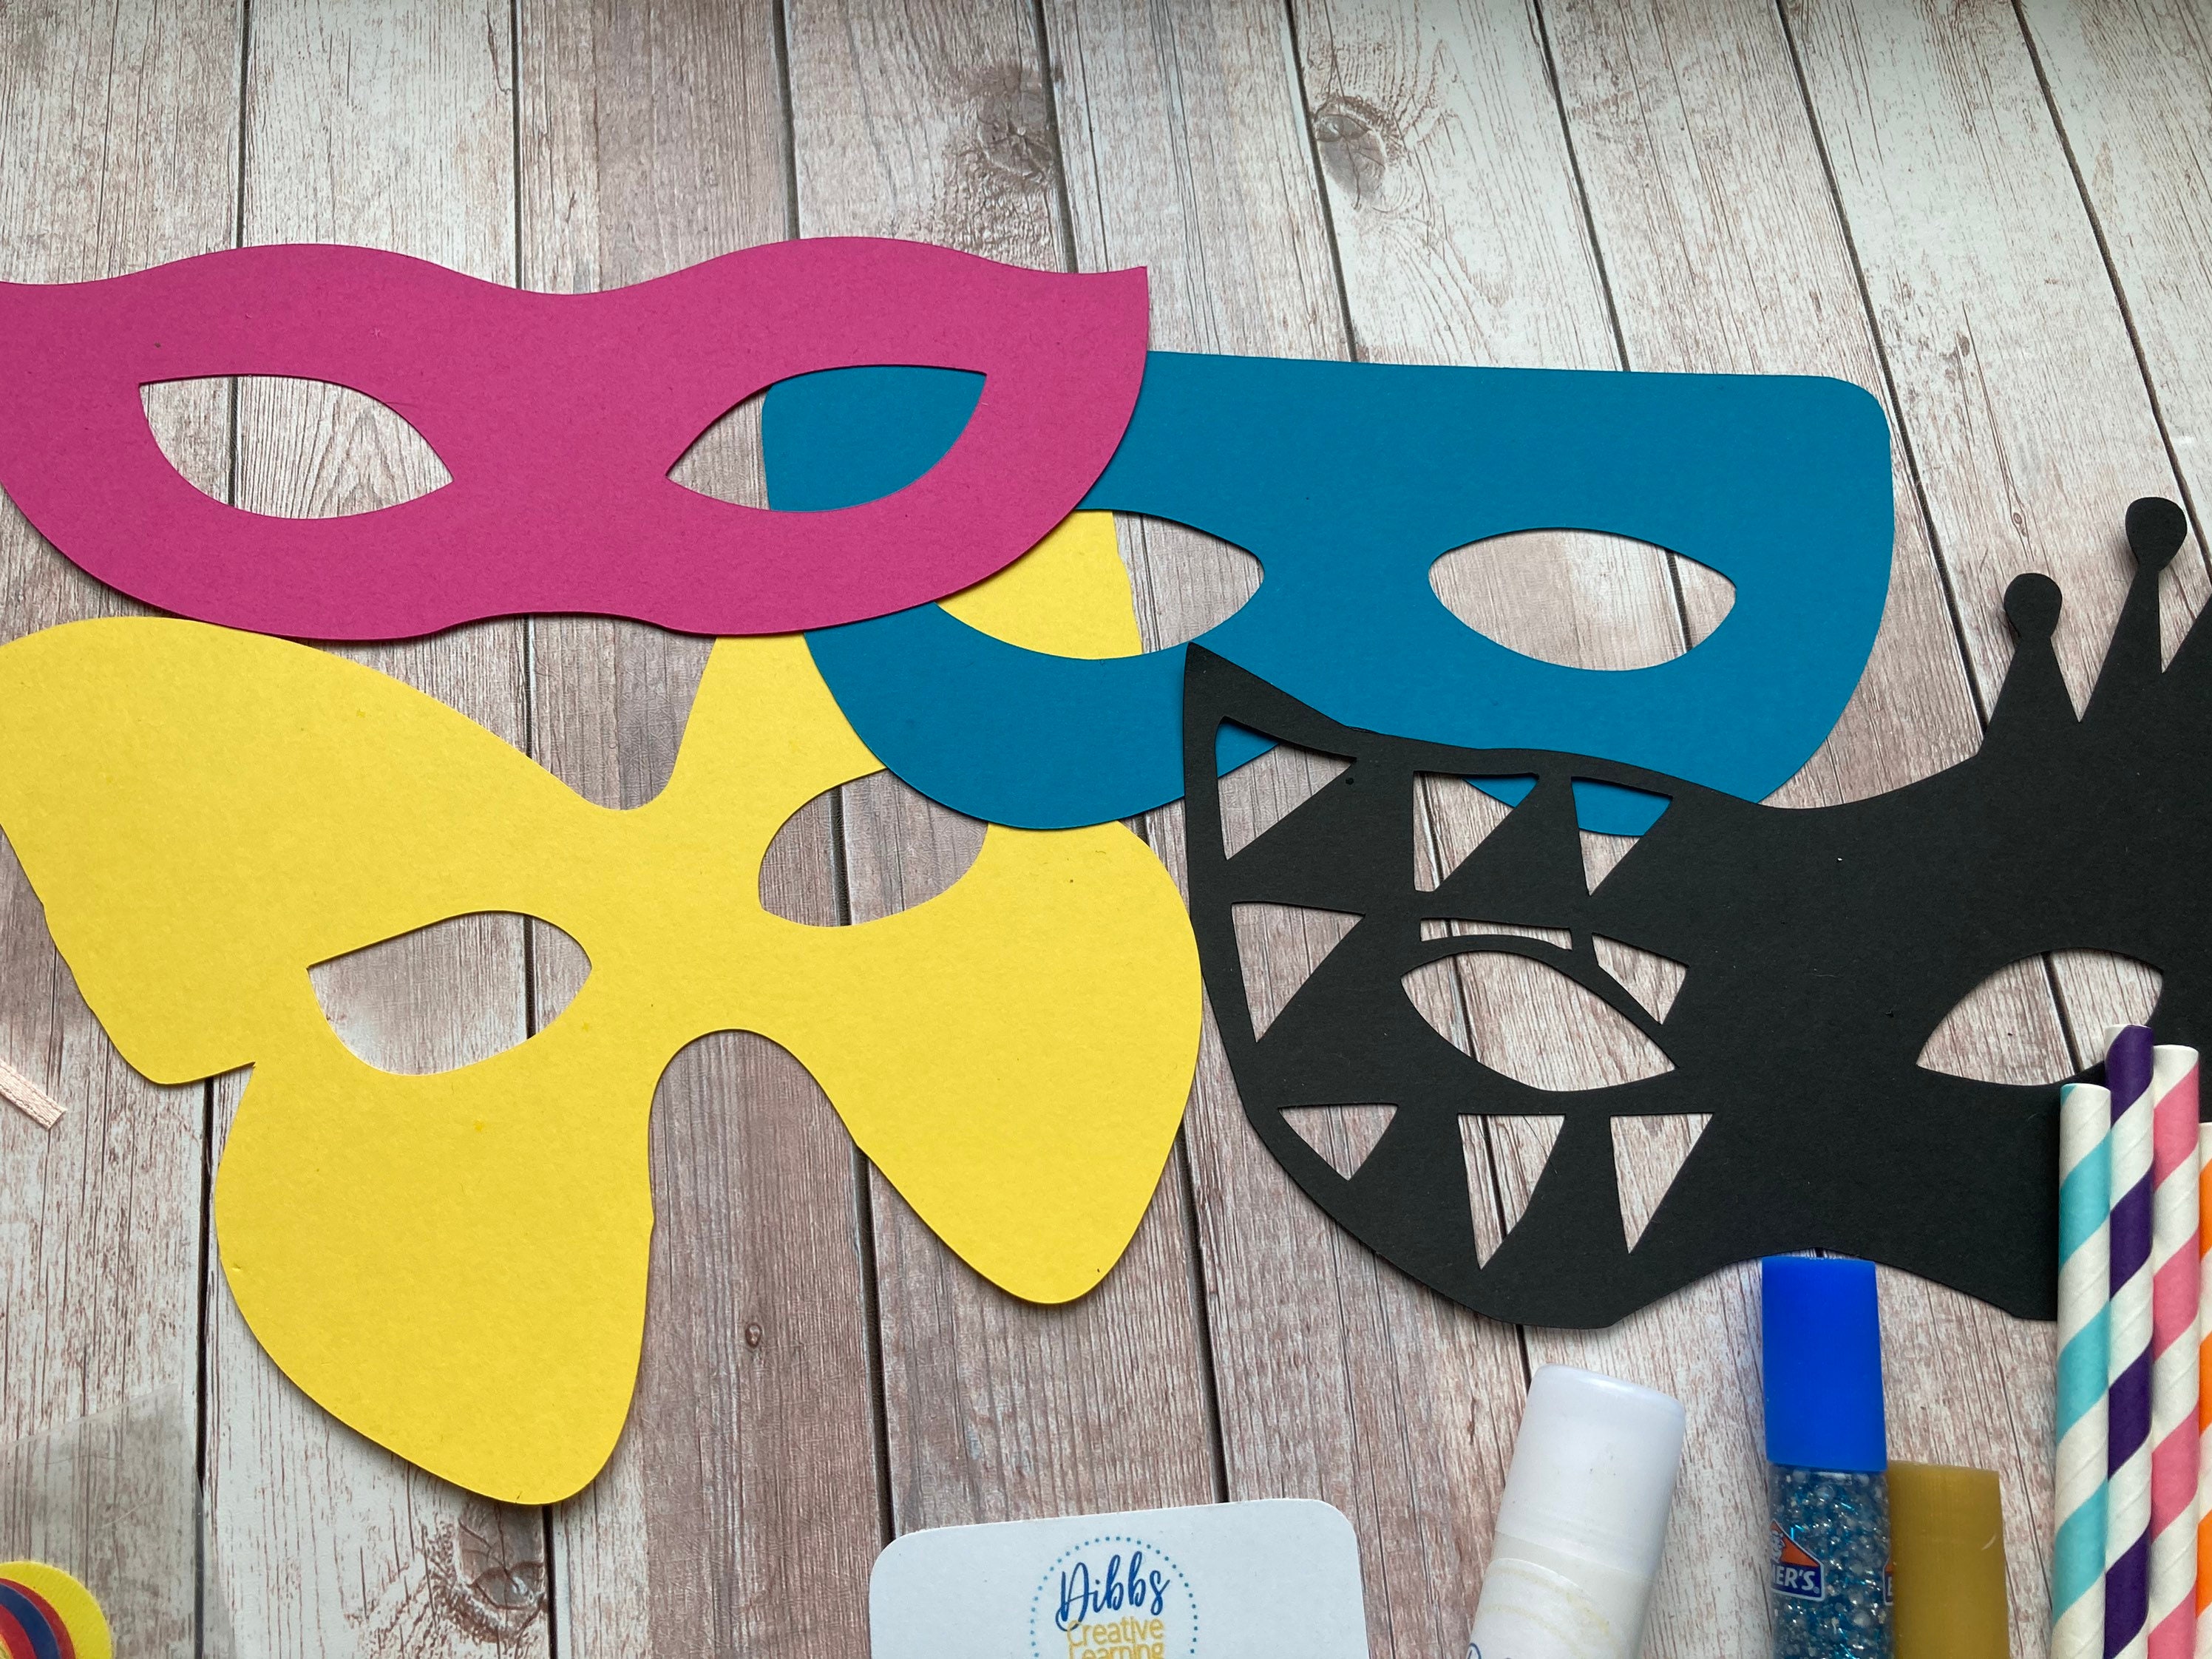 How to Make a Paper Plate Mardi Gras Mask – About Family Crafts